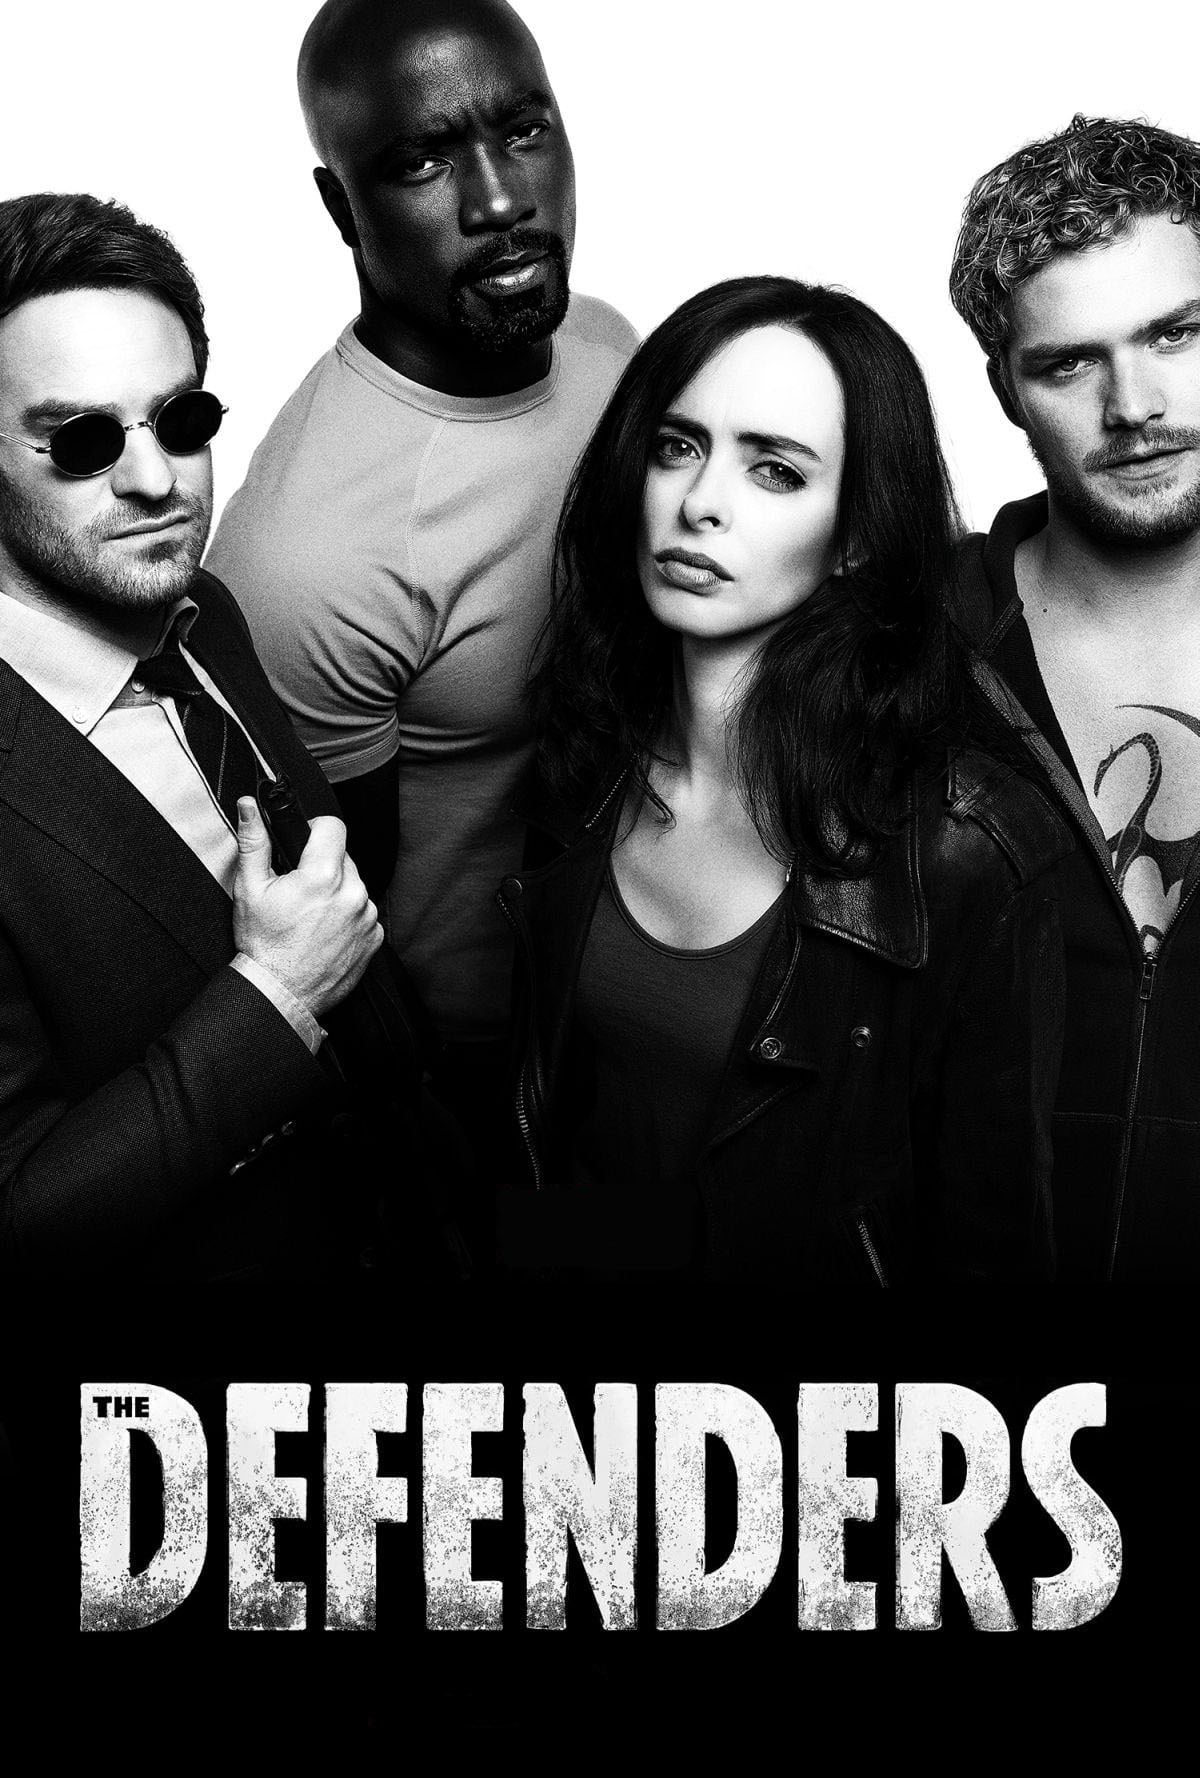 Marvel’s The Defenders (Season 1) Complete English WEB-DL 1080p 720p x264 HD [ALL Episodes] | Netflix Series